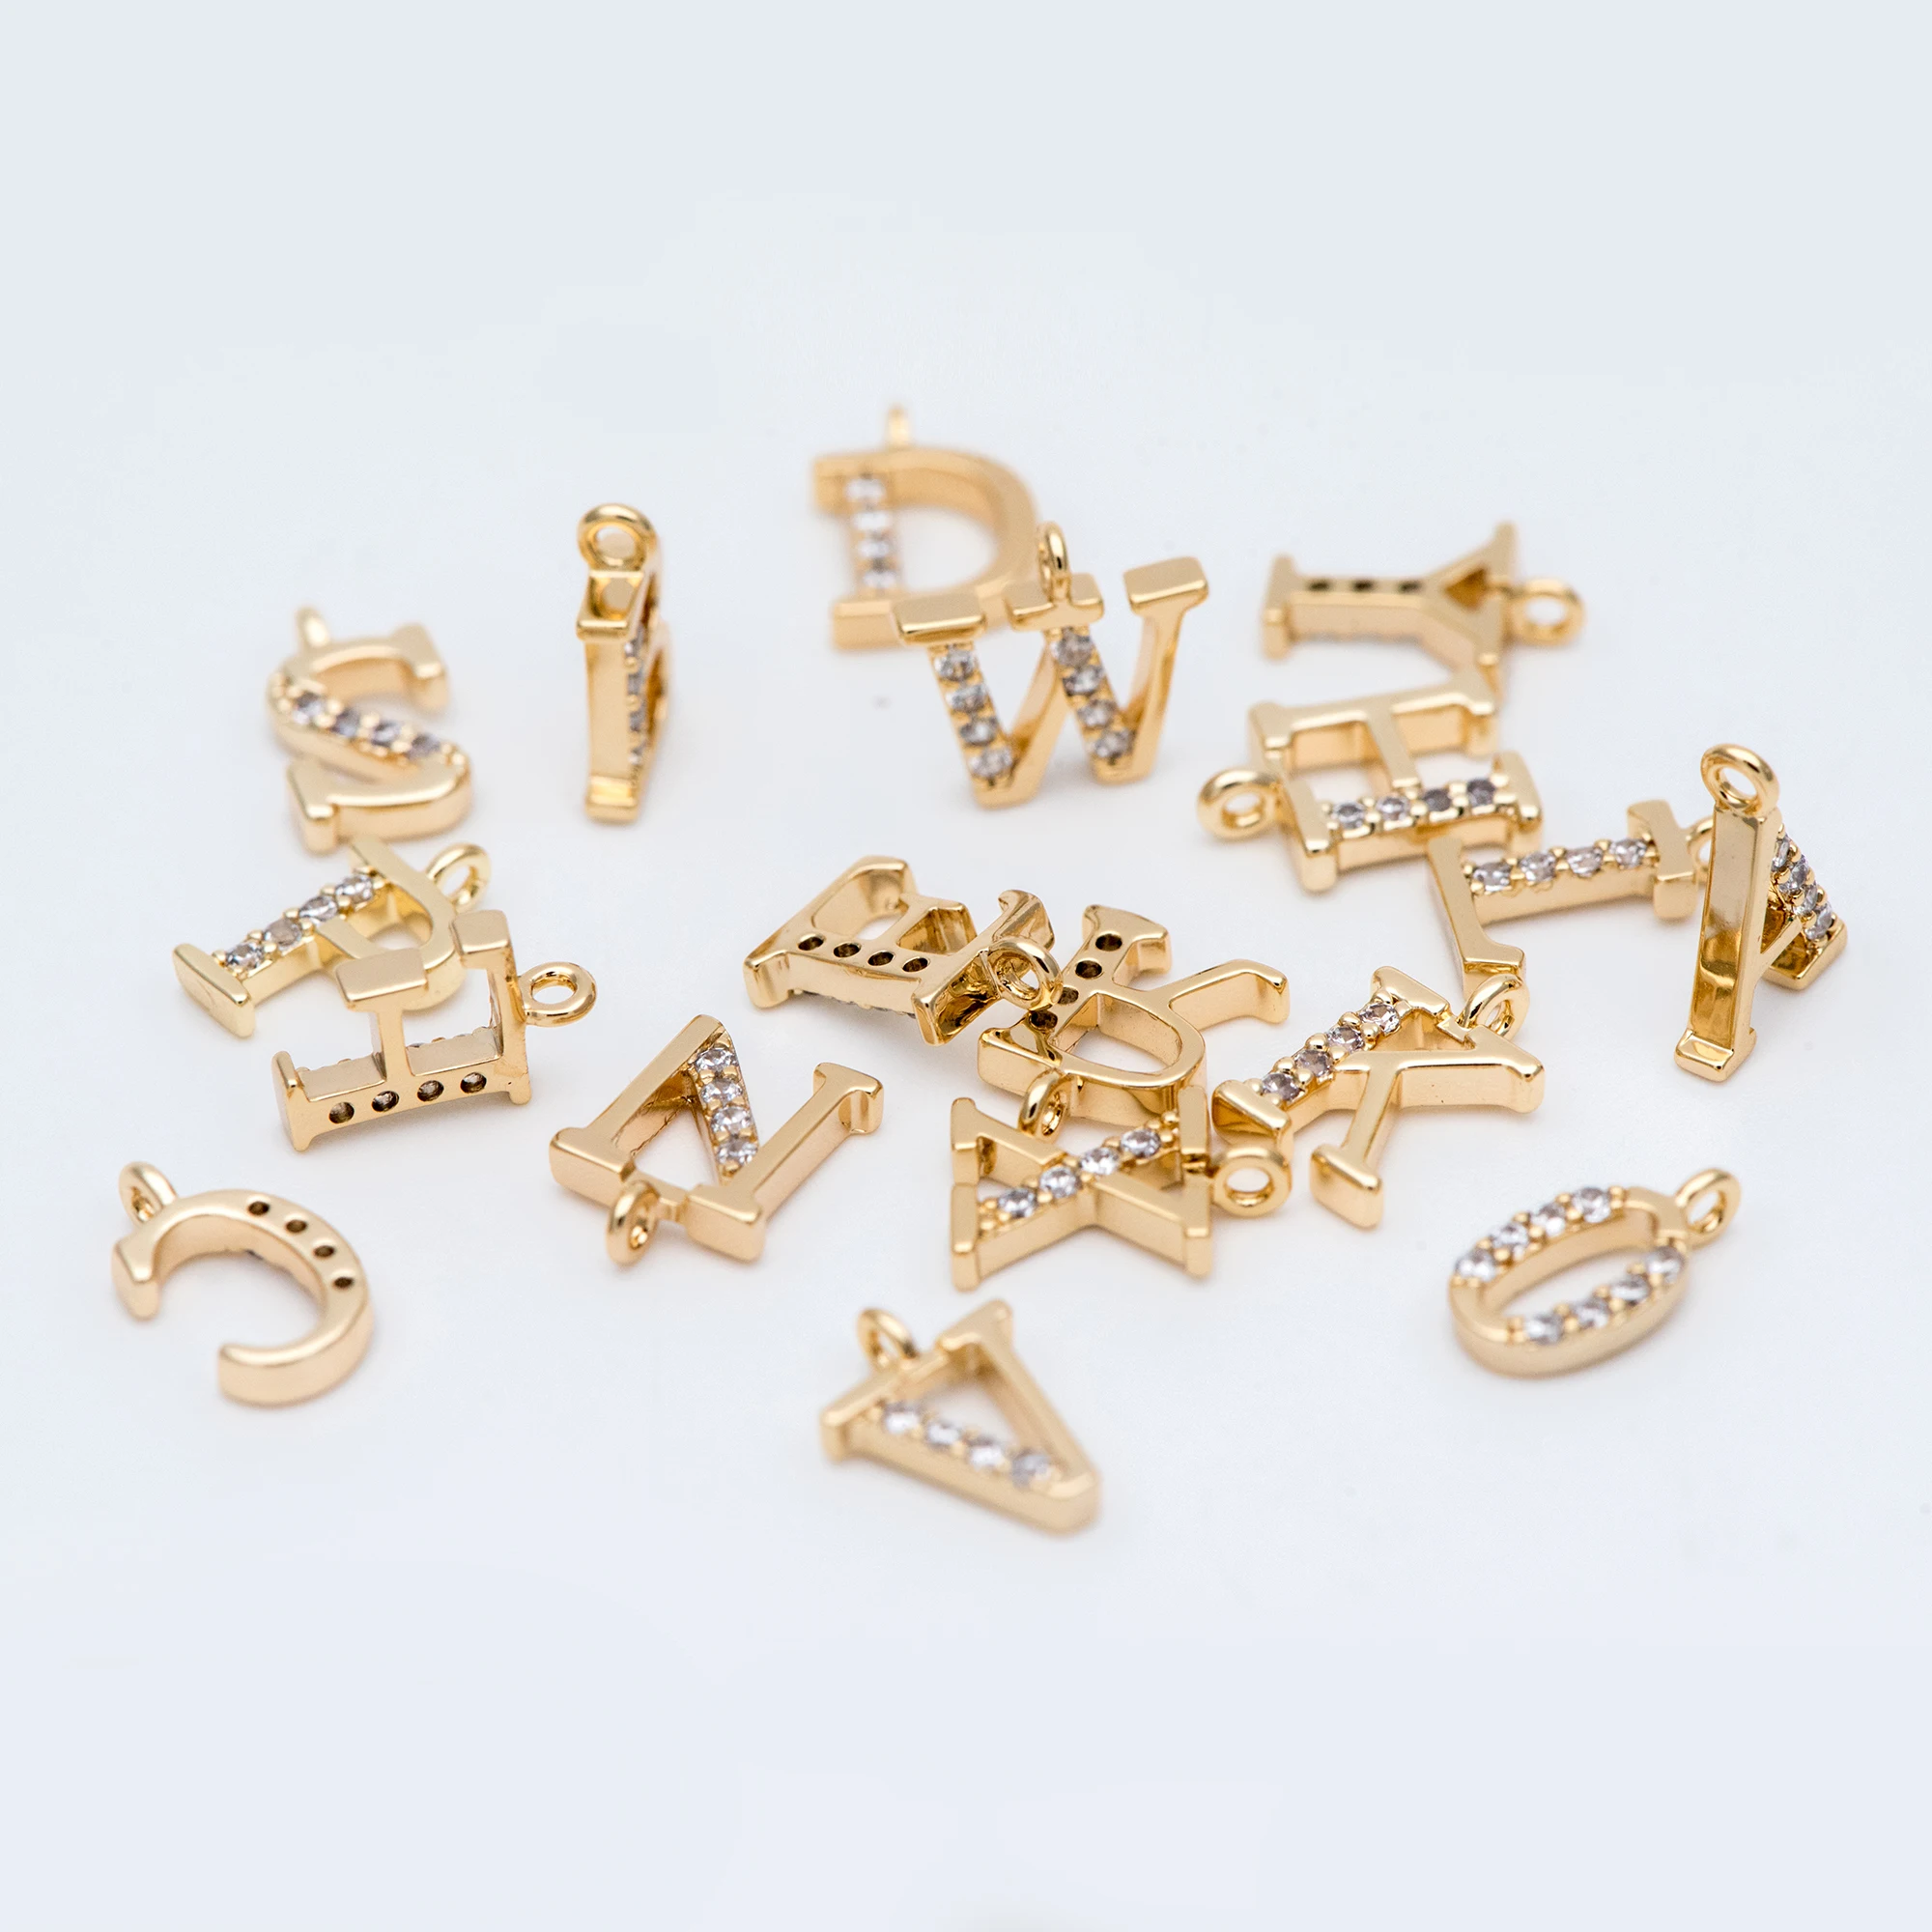 Bracelet Making Pendant STAR pendant 16mm 18K 3D Gold Plated Charm 10PCS North Star Charms Jewelry Findings S1050